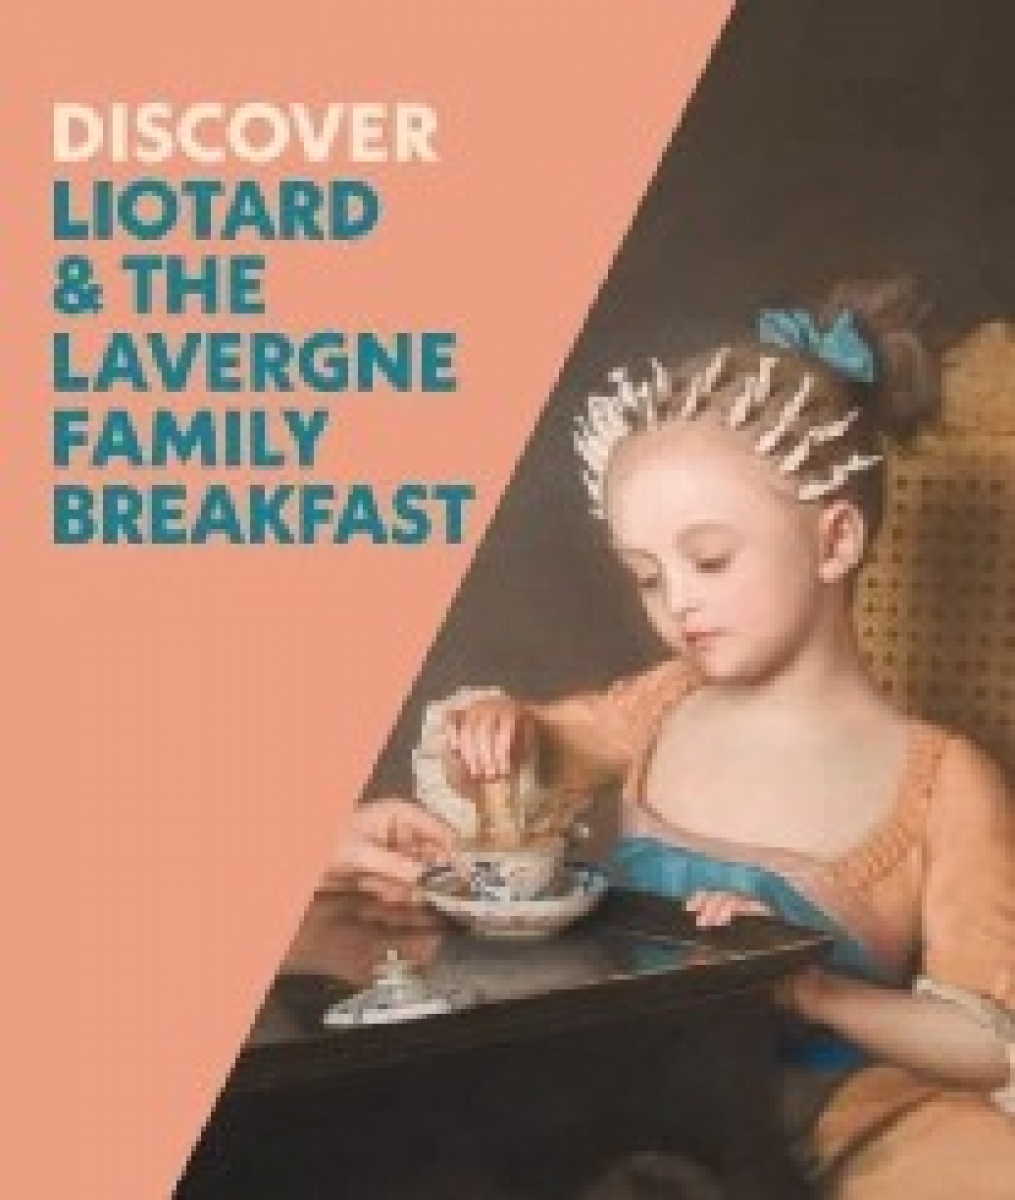 Francesca, Whitlum-cooper Discover liotard and the lavergne family breakfast 